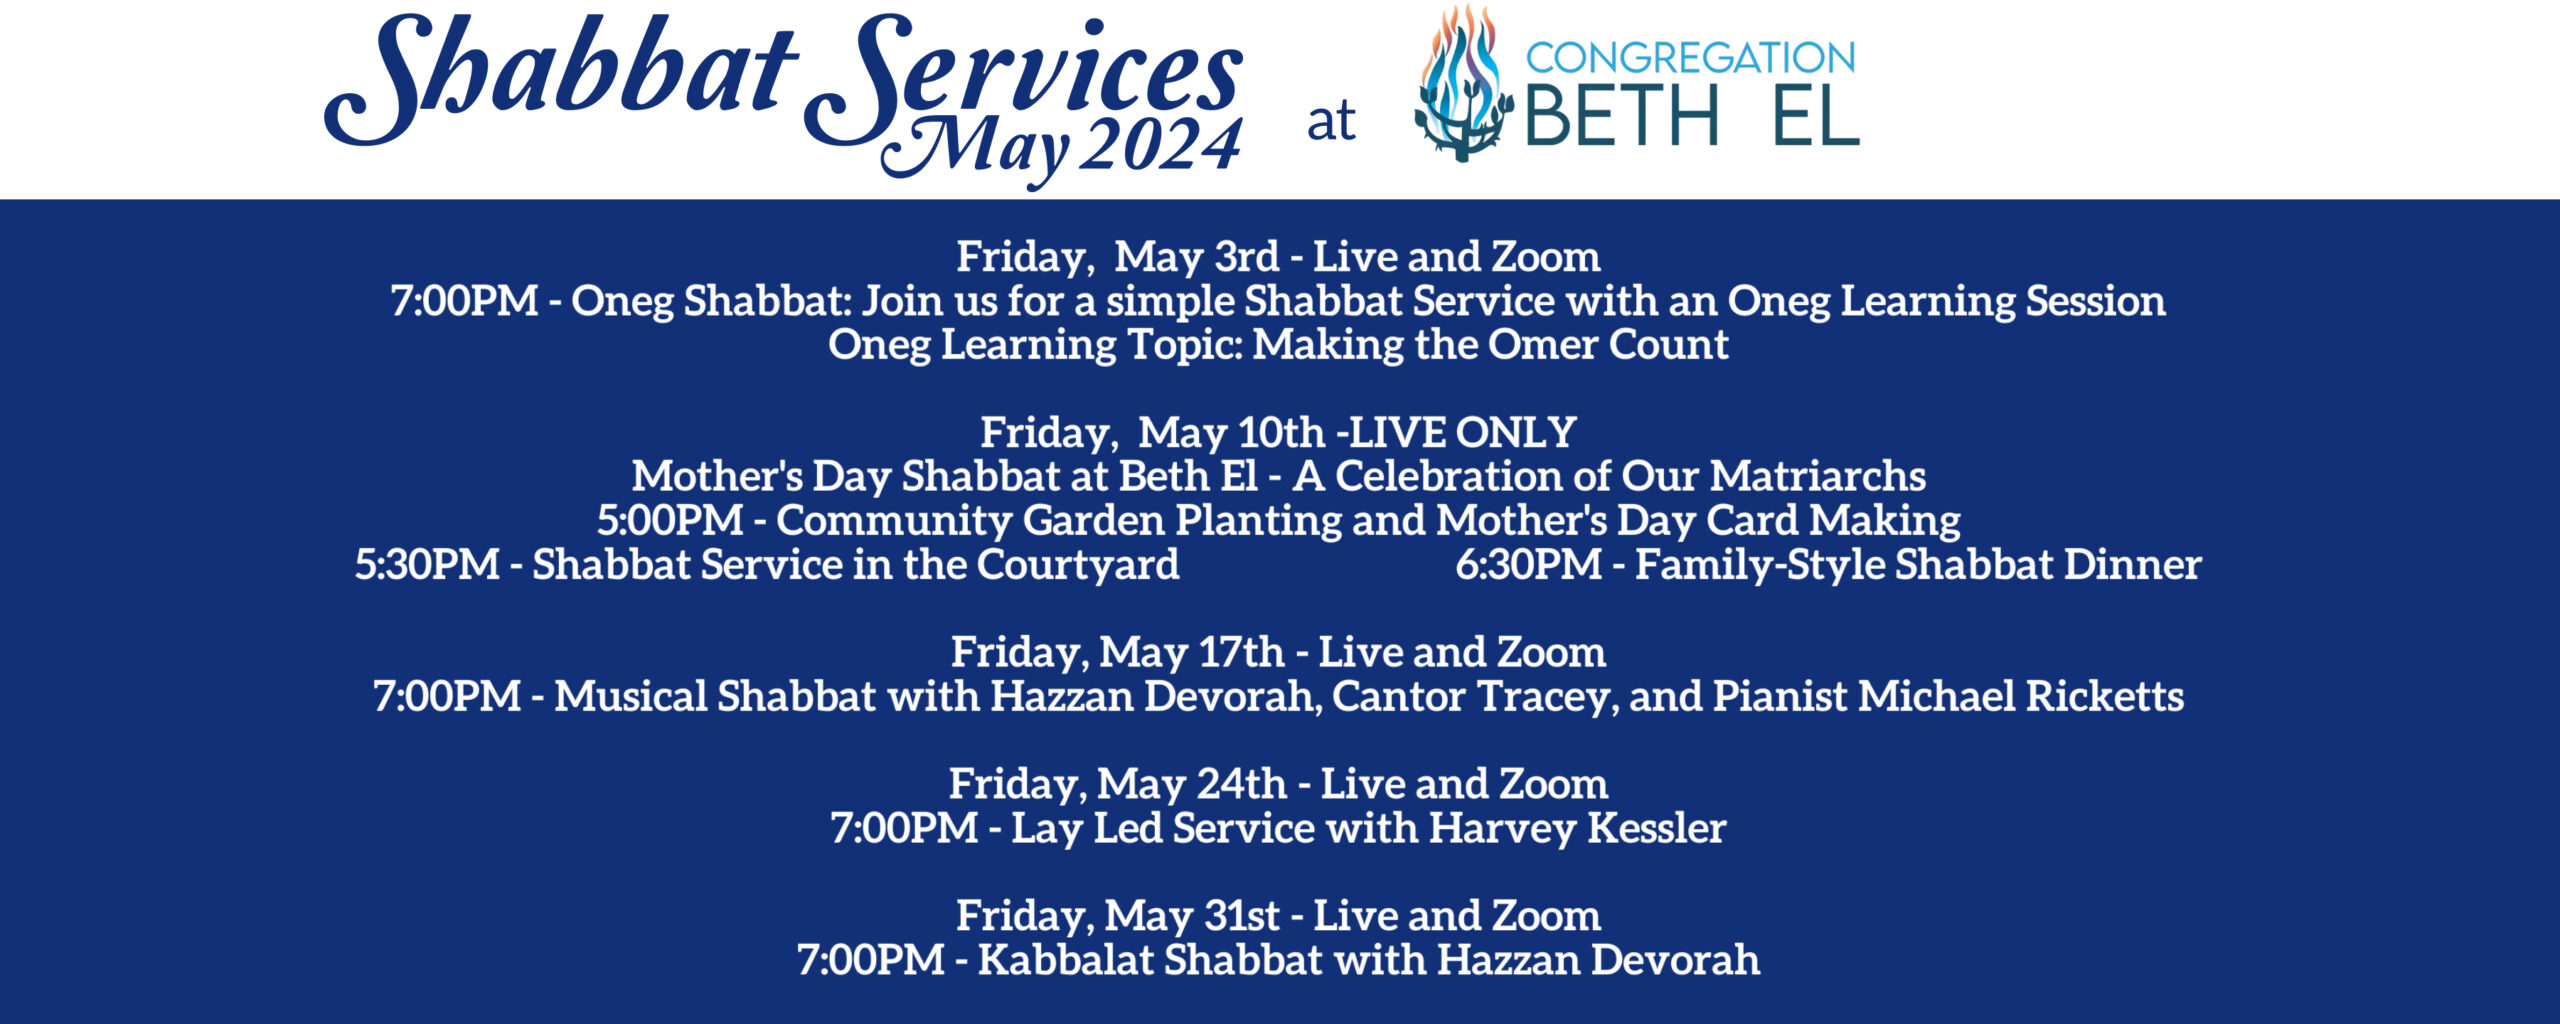 Services - May 2024